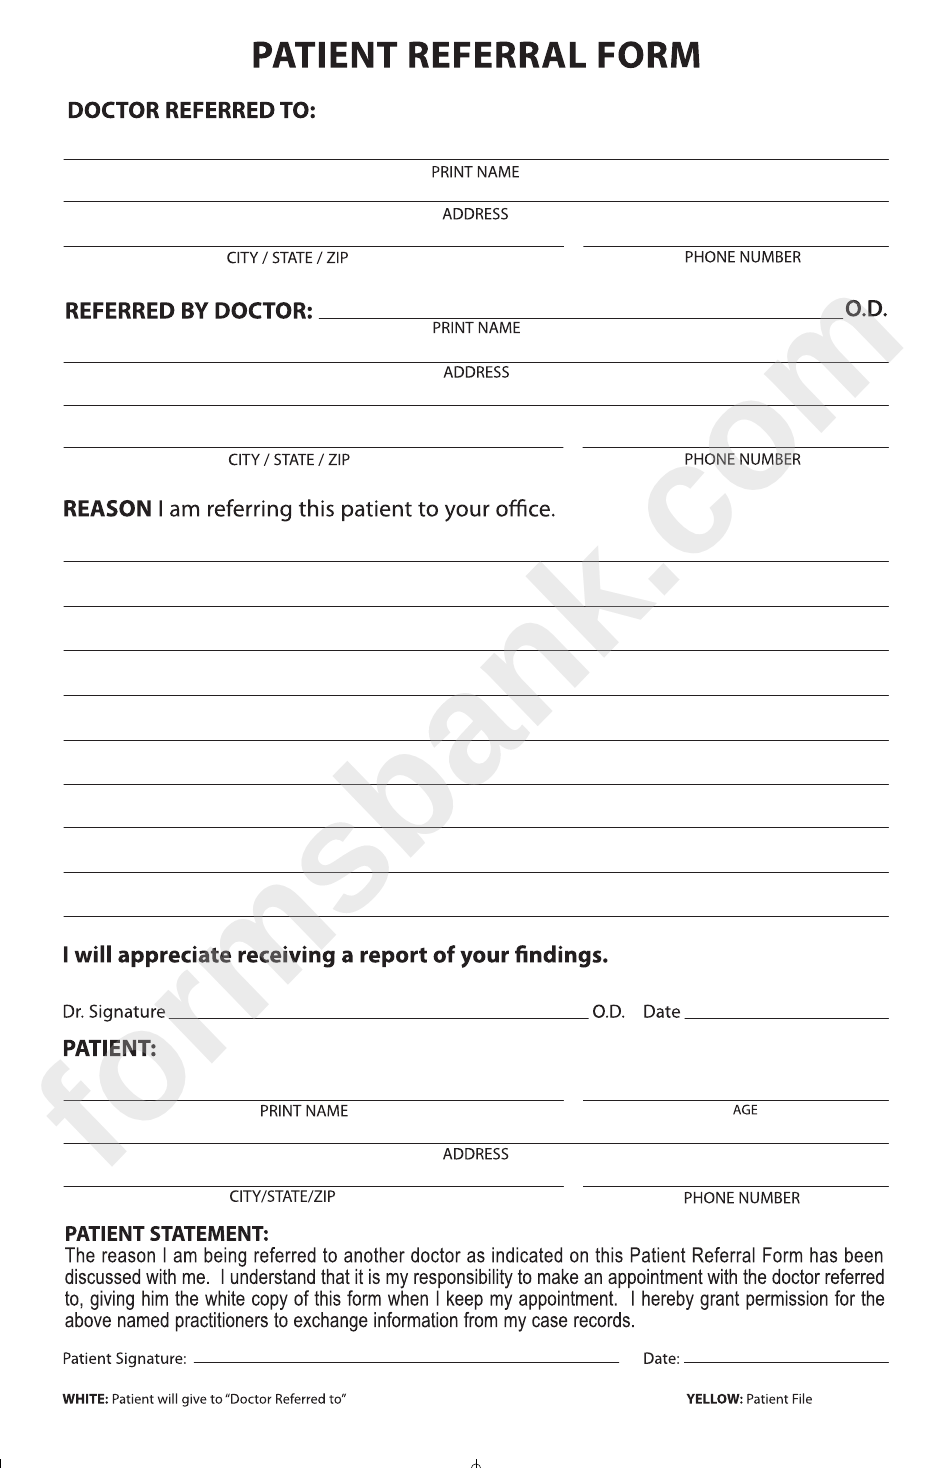 printable-dr-referral-forms-printable-forms-free-online